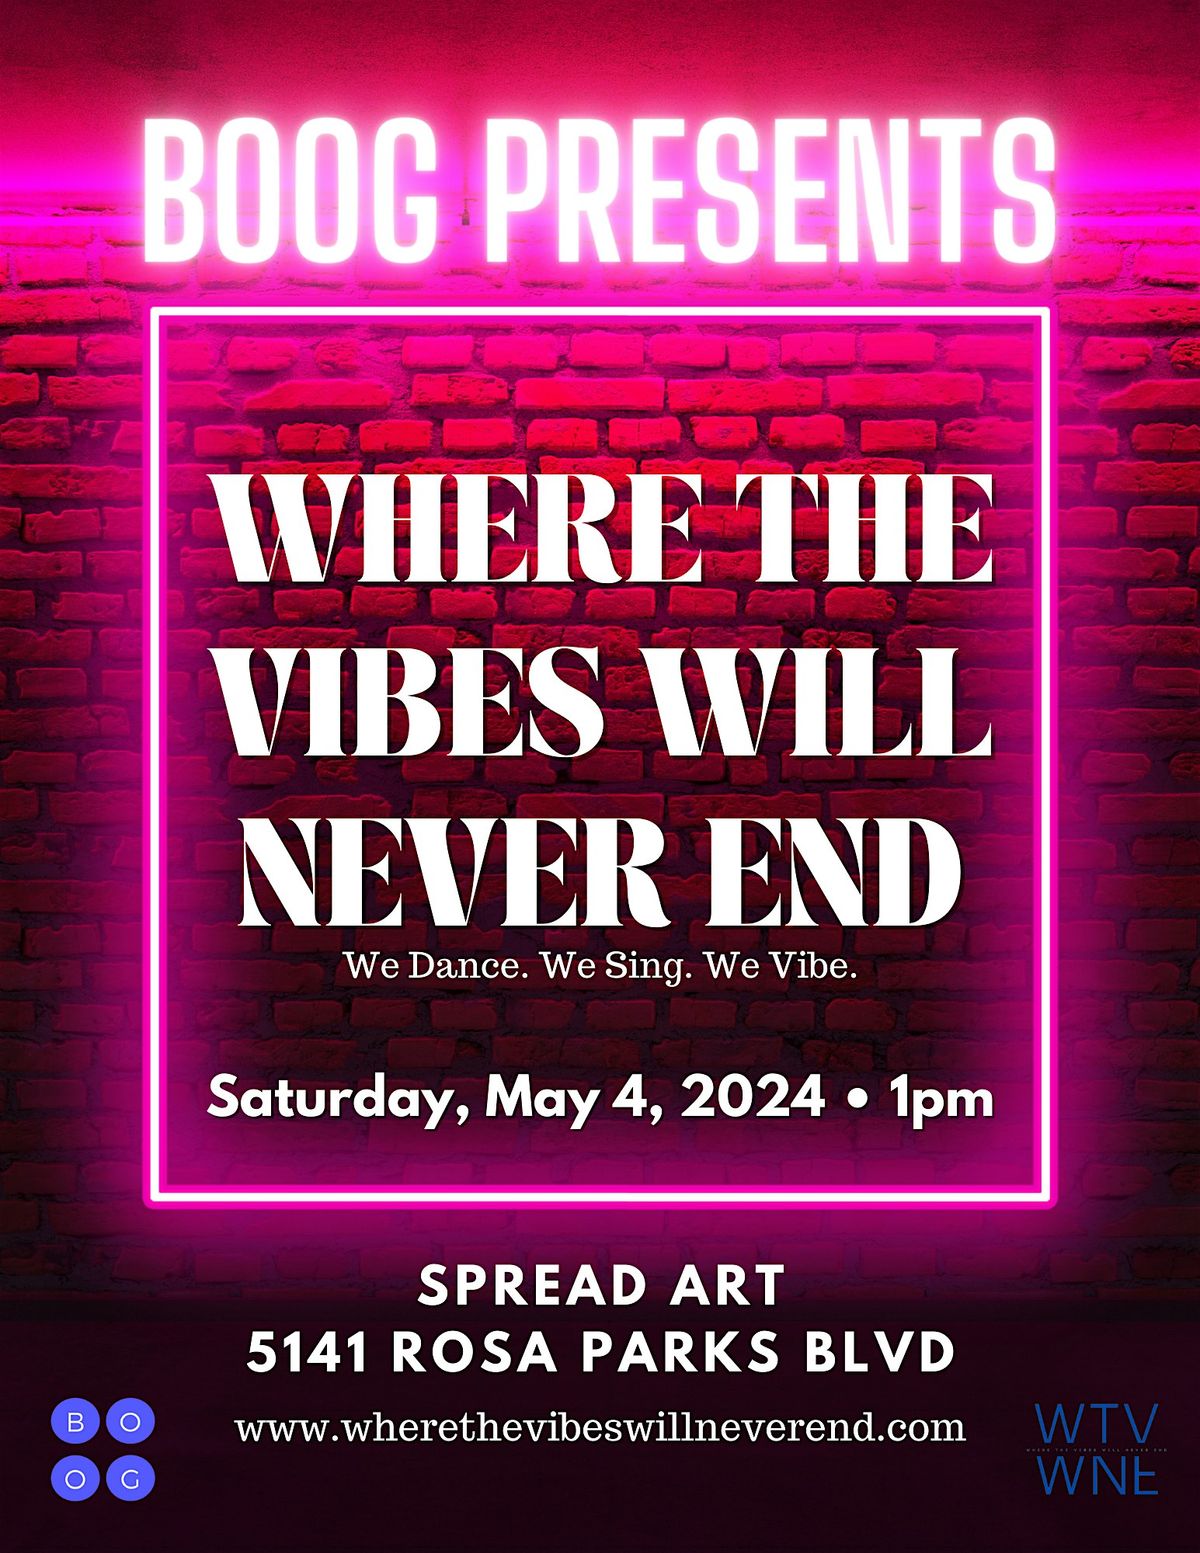 WHERE THE VIBES WILL NEVER END | Day Party Series